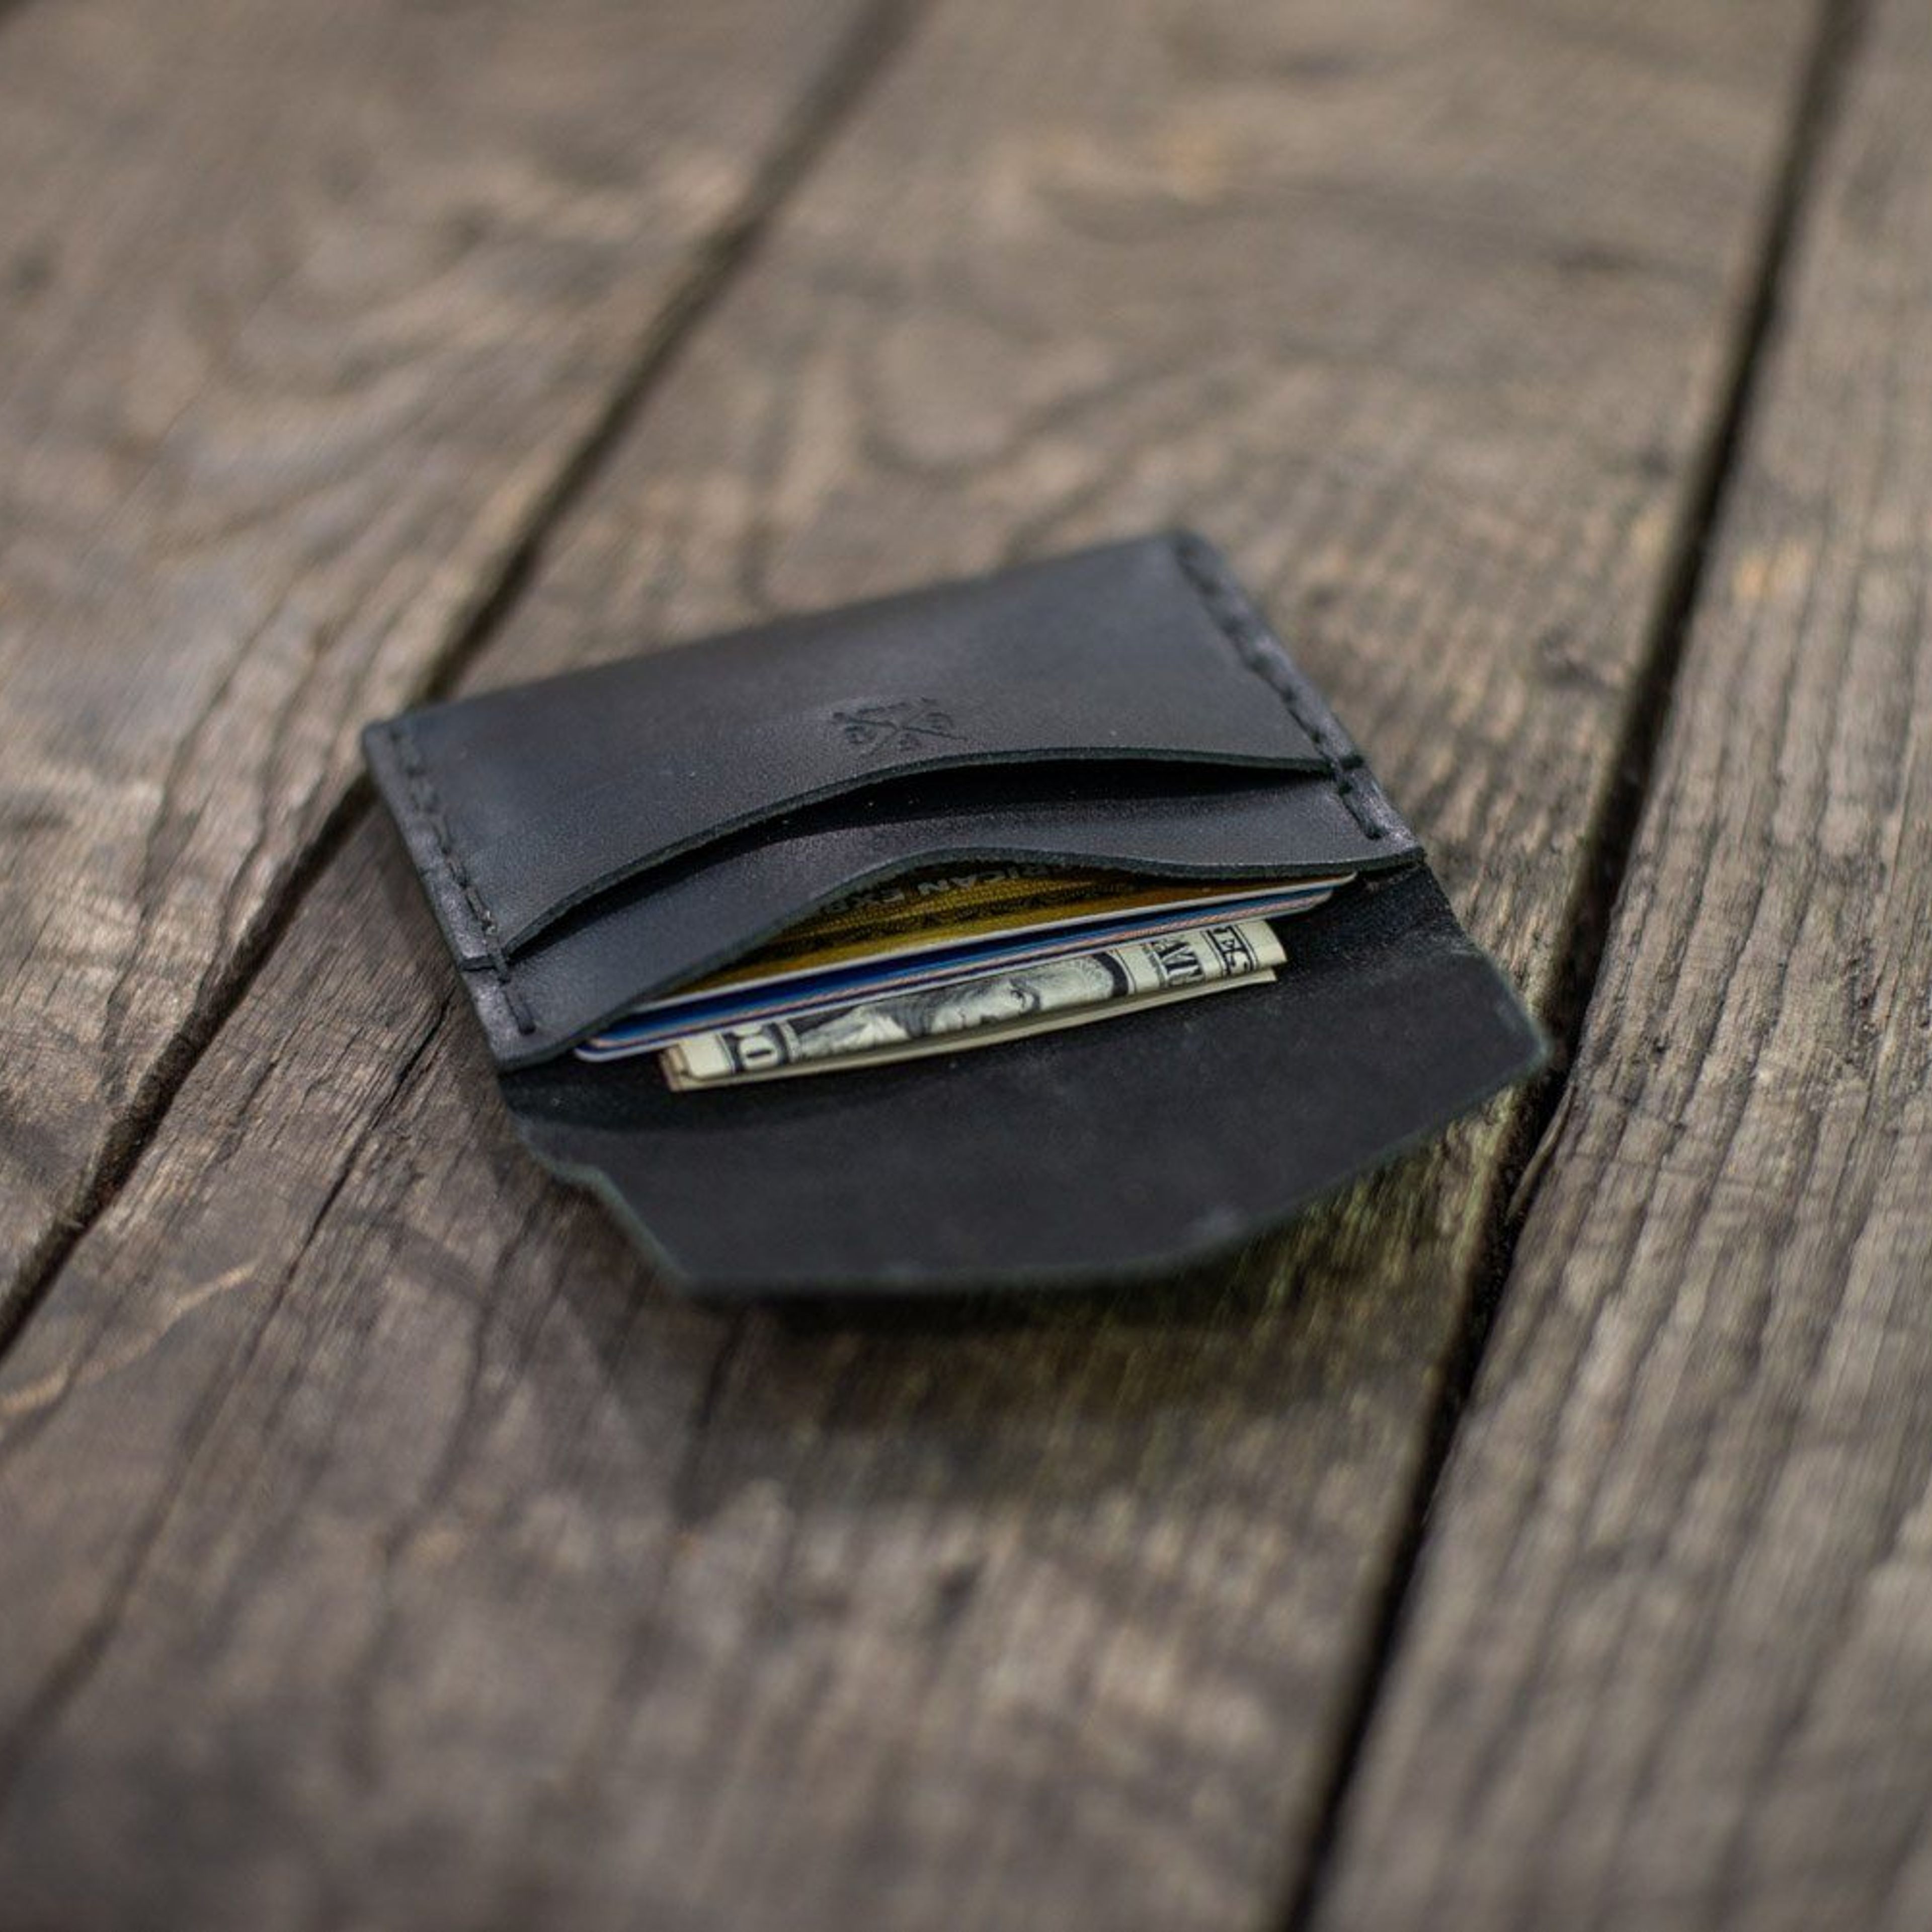 Tuck Leather Card Wallet